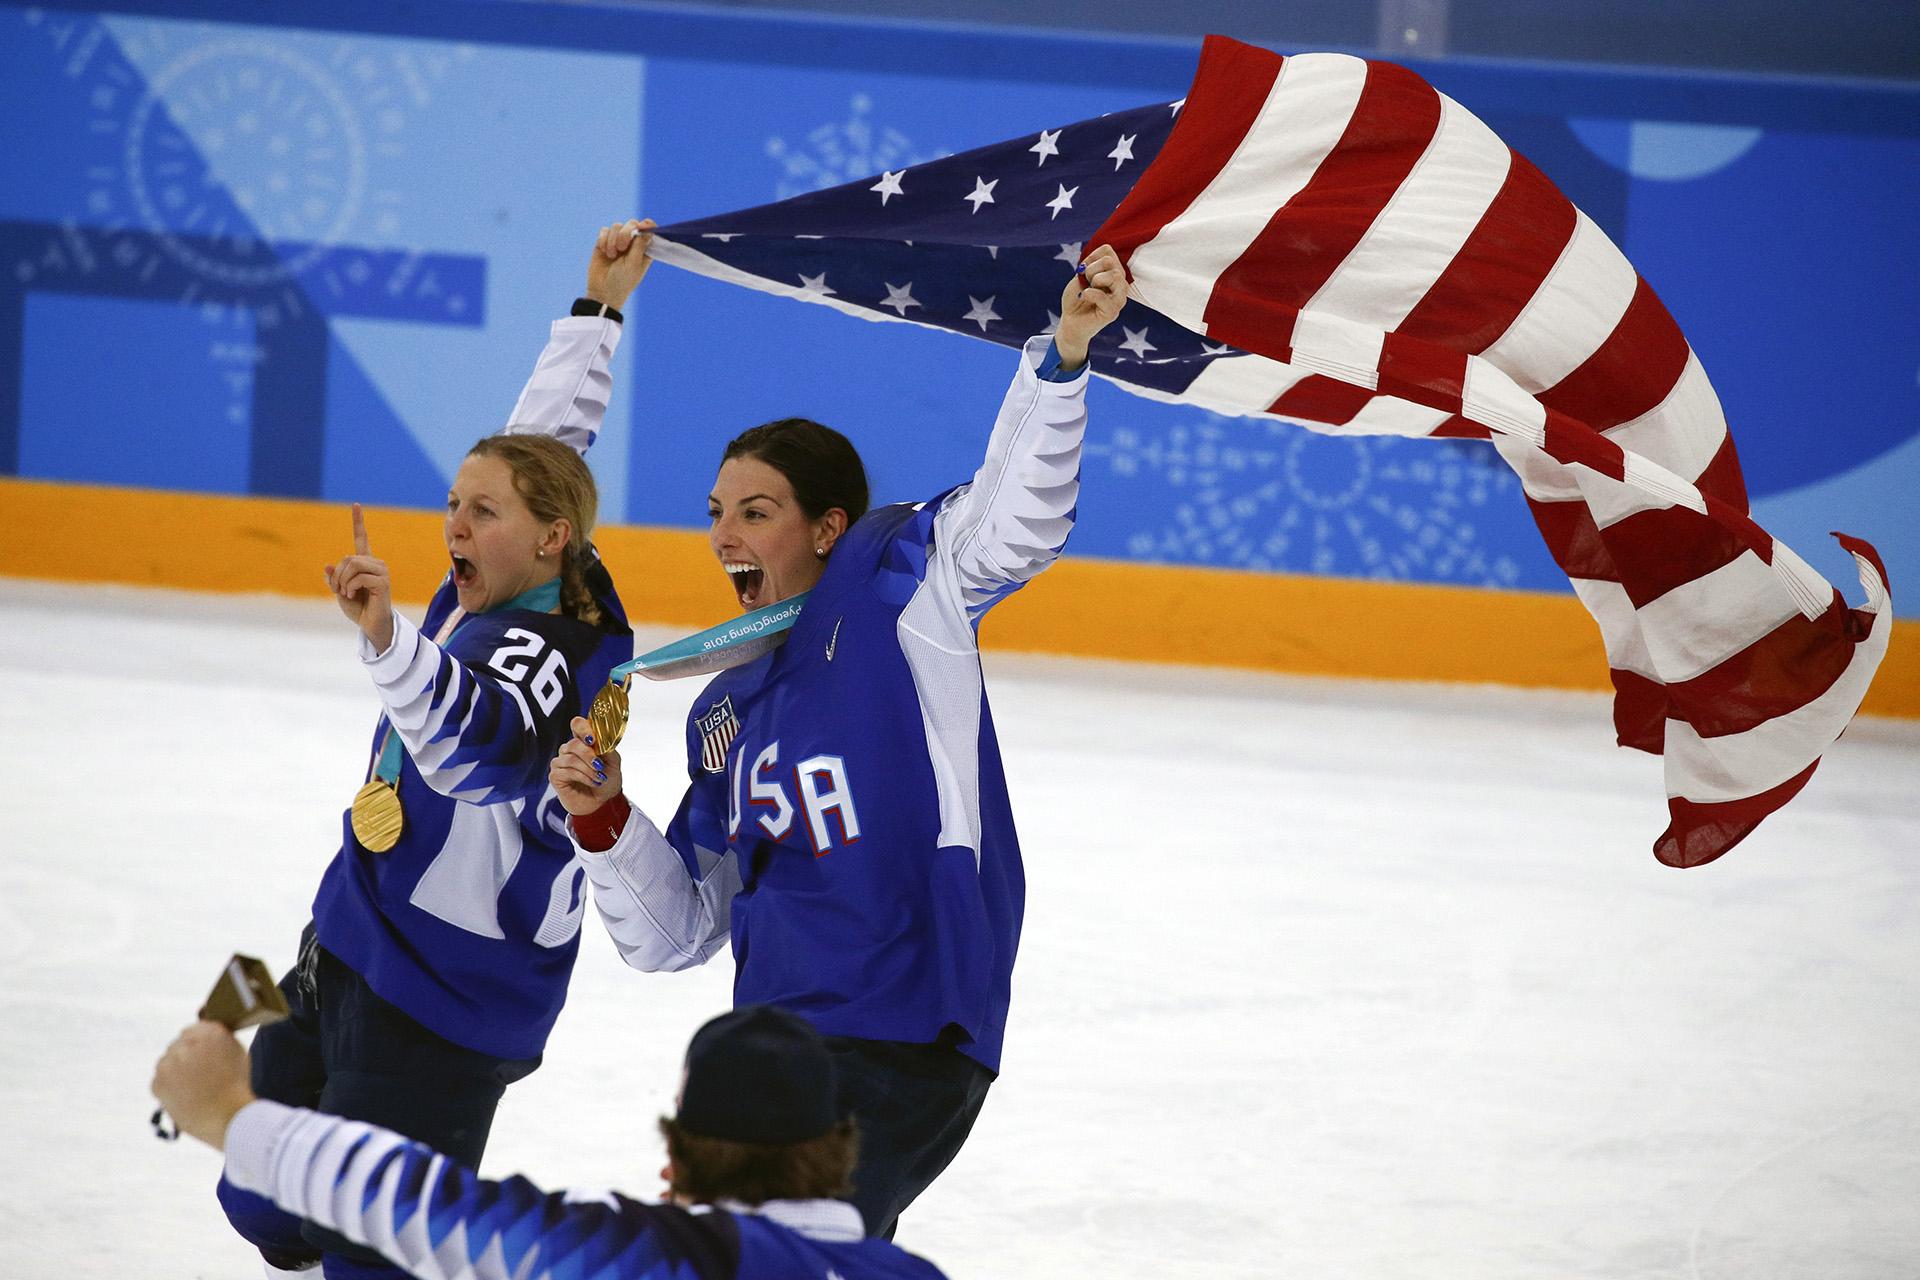 In this Feb. 22, 2018, file photo, United States' Kendall Coyne Schofield, left, and Hilary Knight celebrate after winning the women’s gold medal hockey game against Canada at the 2018 Winter Olympics in Gangneung, South Korea. (AP Photo / Jae C. Hong, File)